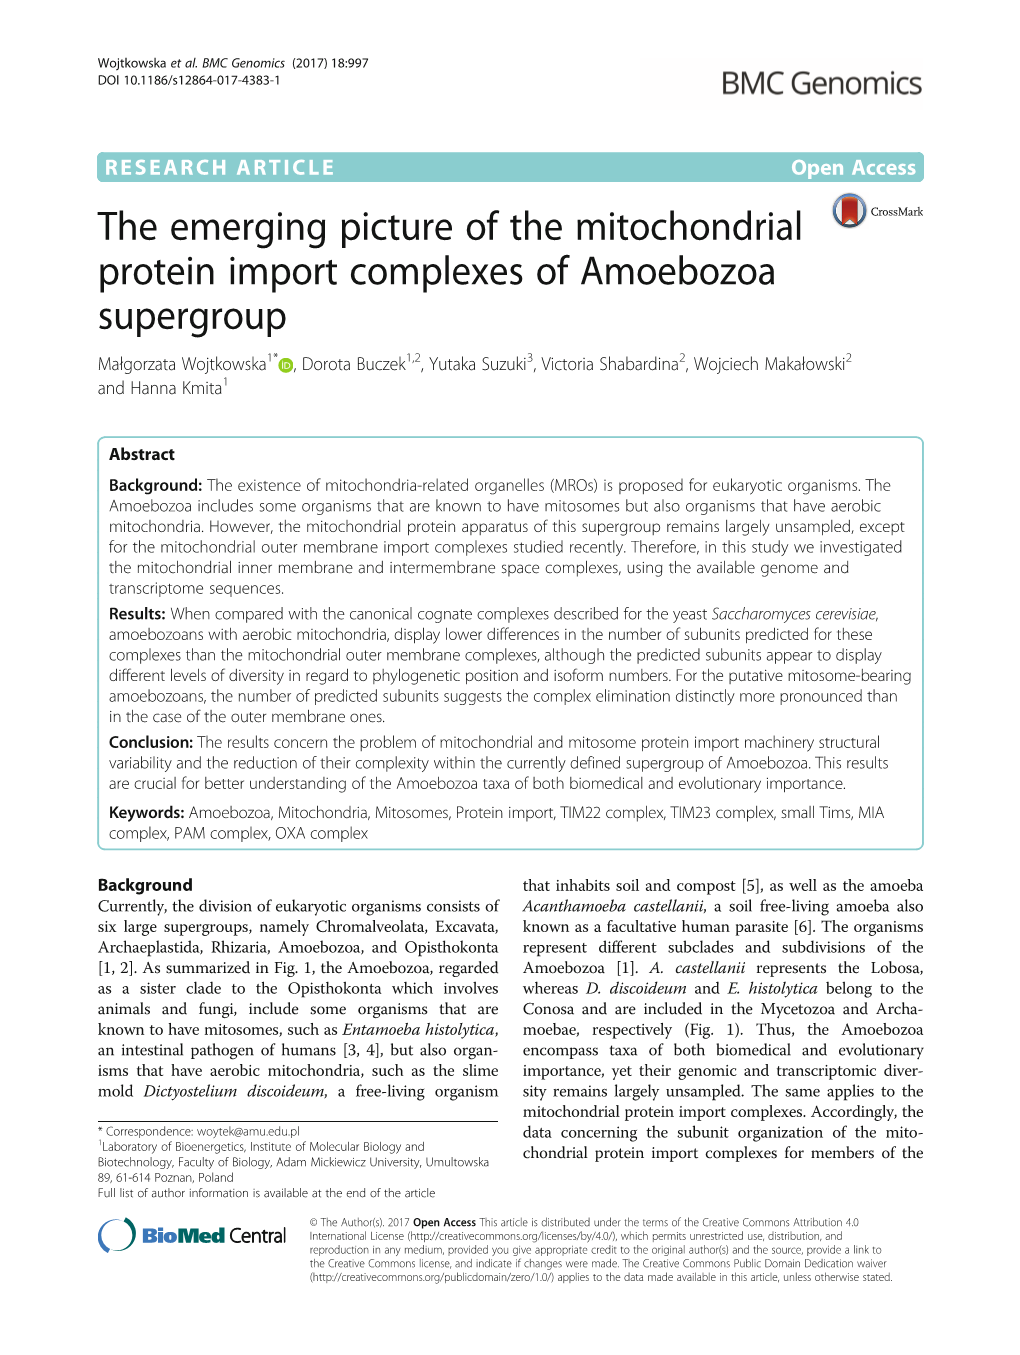 The Emerging Picture of the Mitochondrial Protein Import